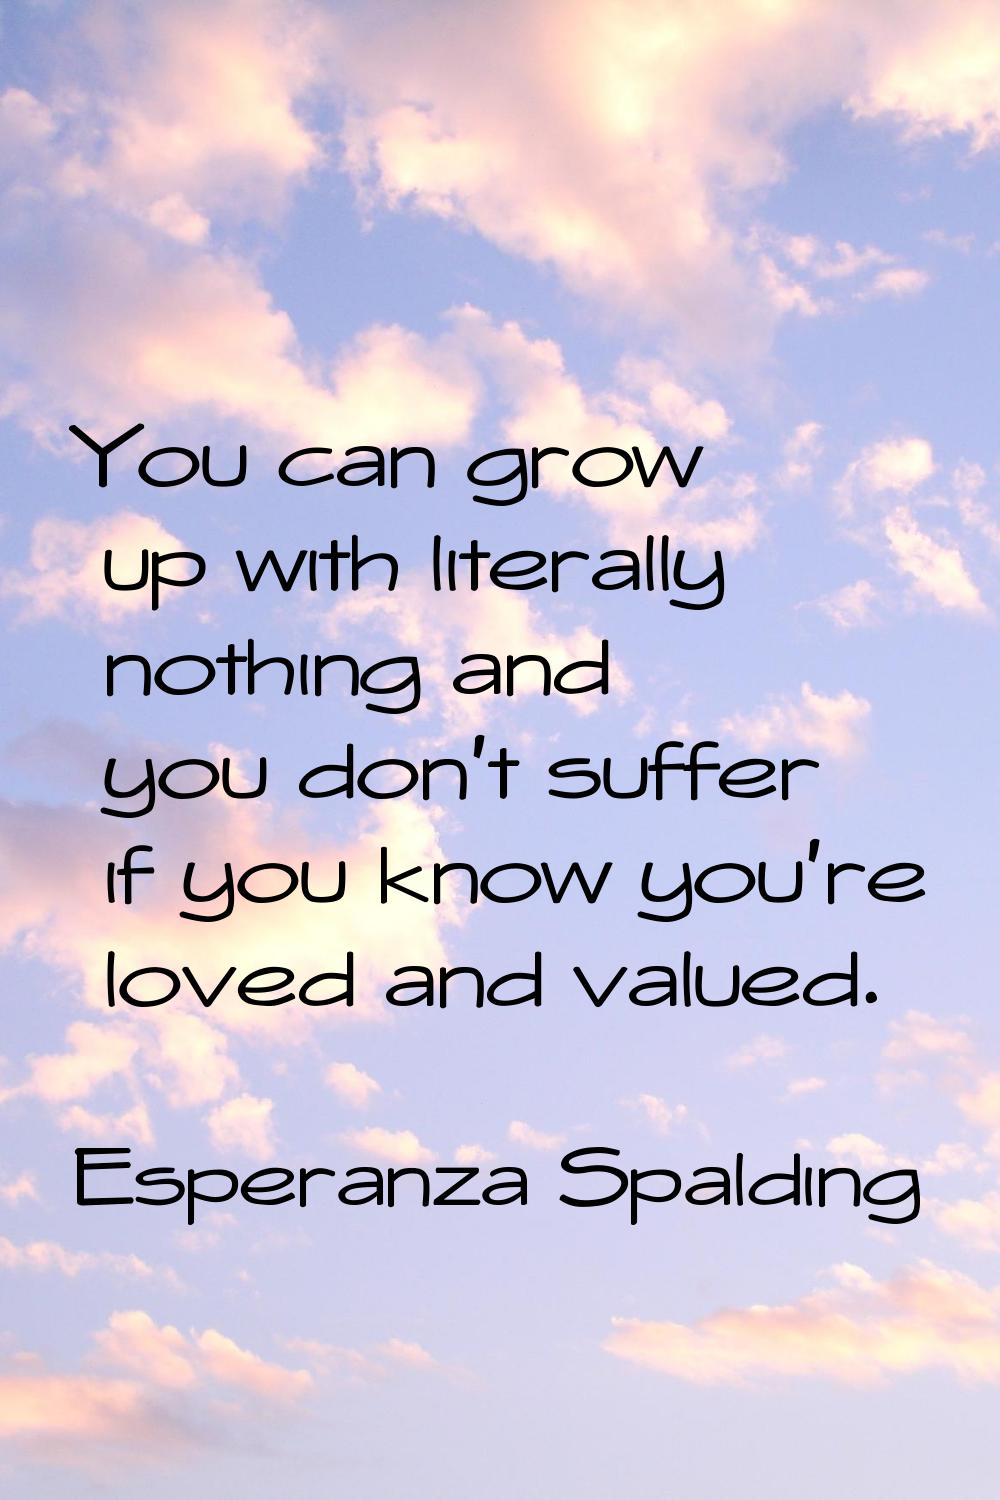 You can grow up with literally nothing and you don't suffer if you know you're loved and valued.